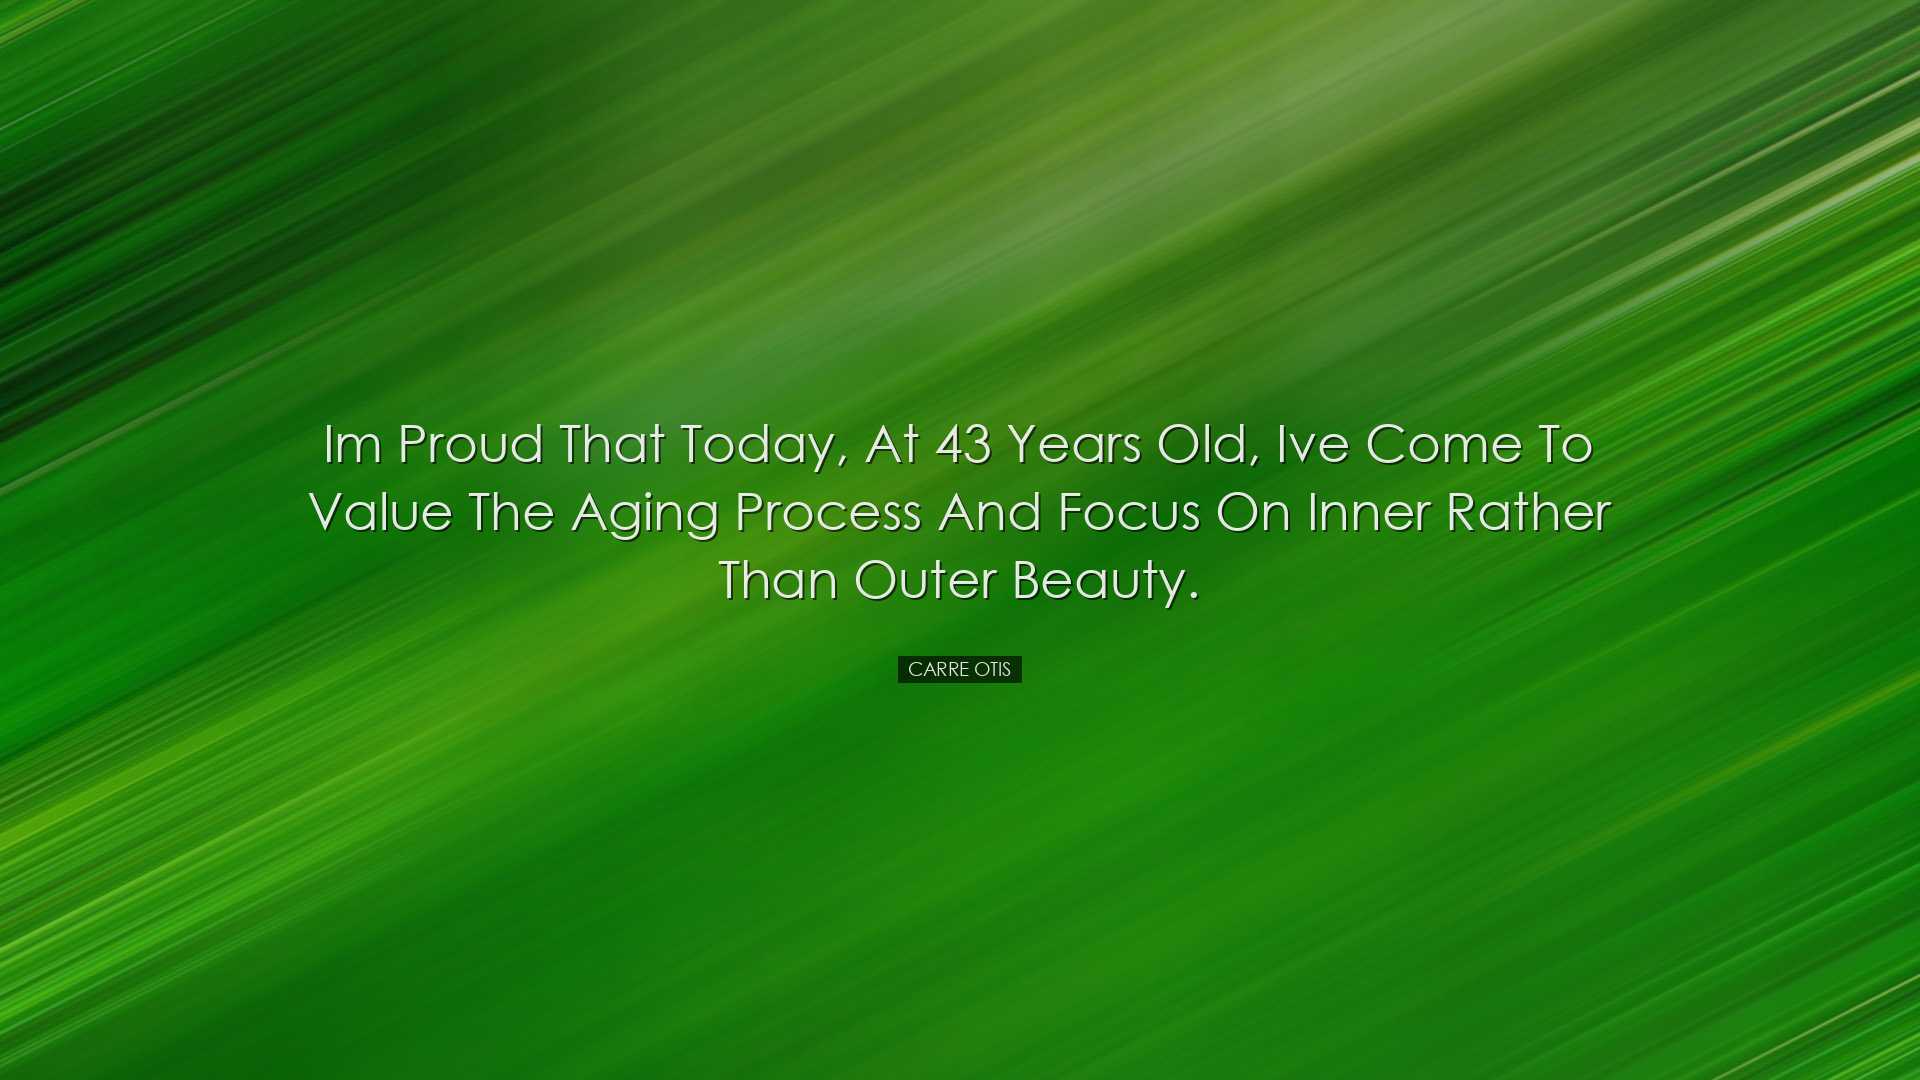 Im proud that today, at 43 years old, Ive come to value the aging